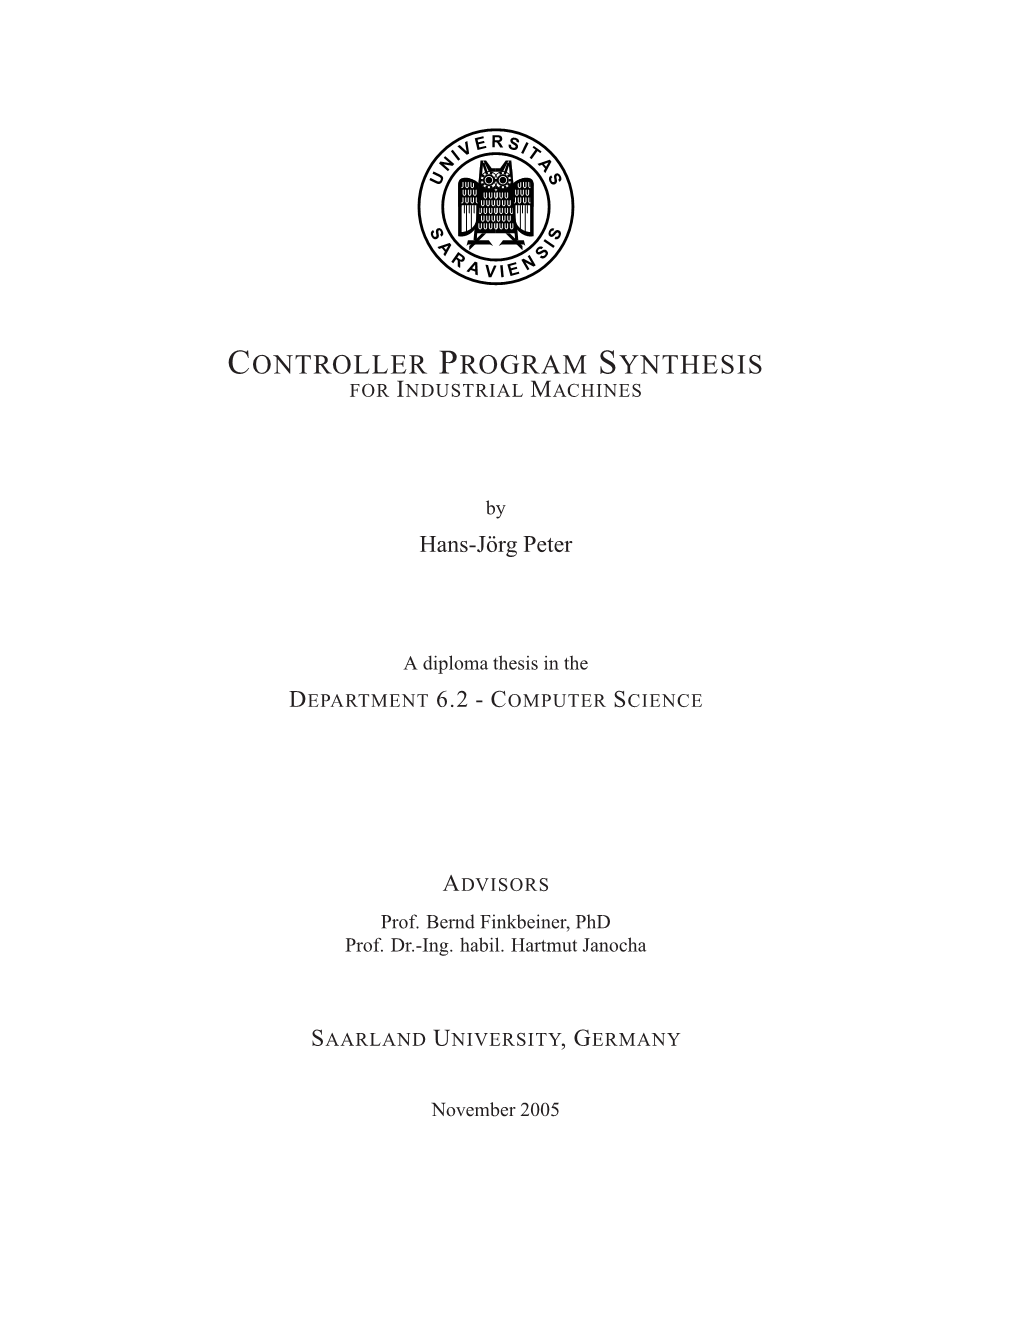 Controller Program Synthesis for Industrial Machines